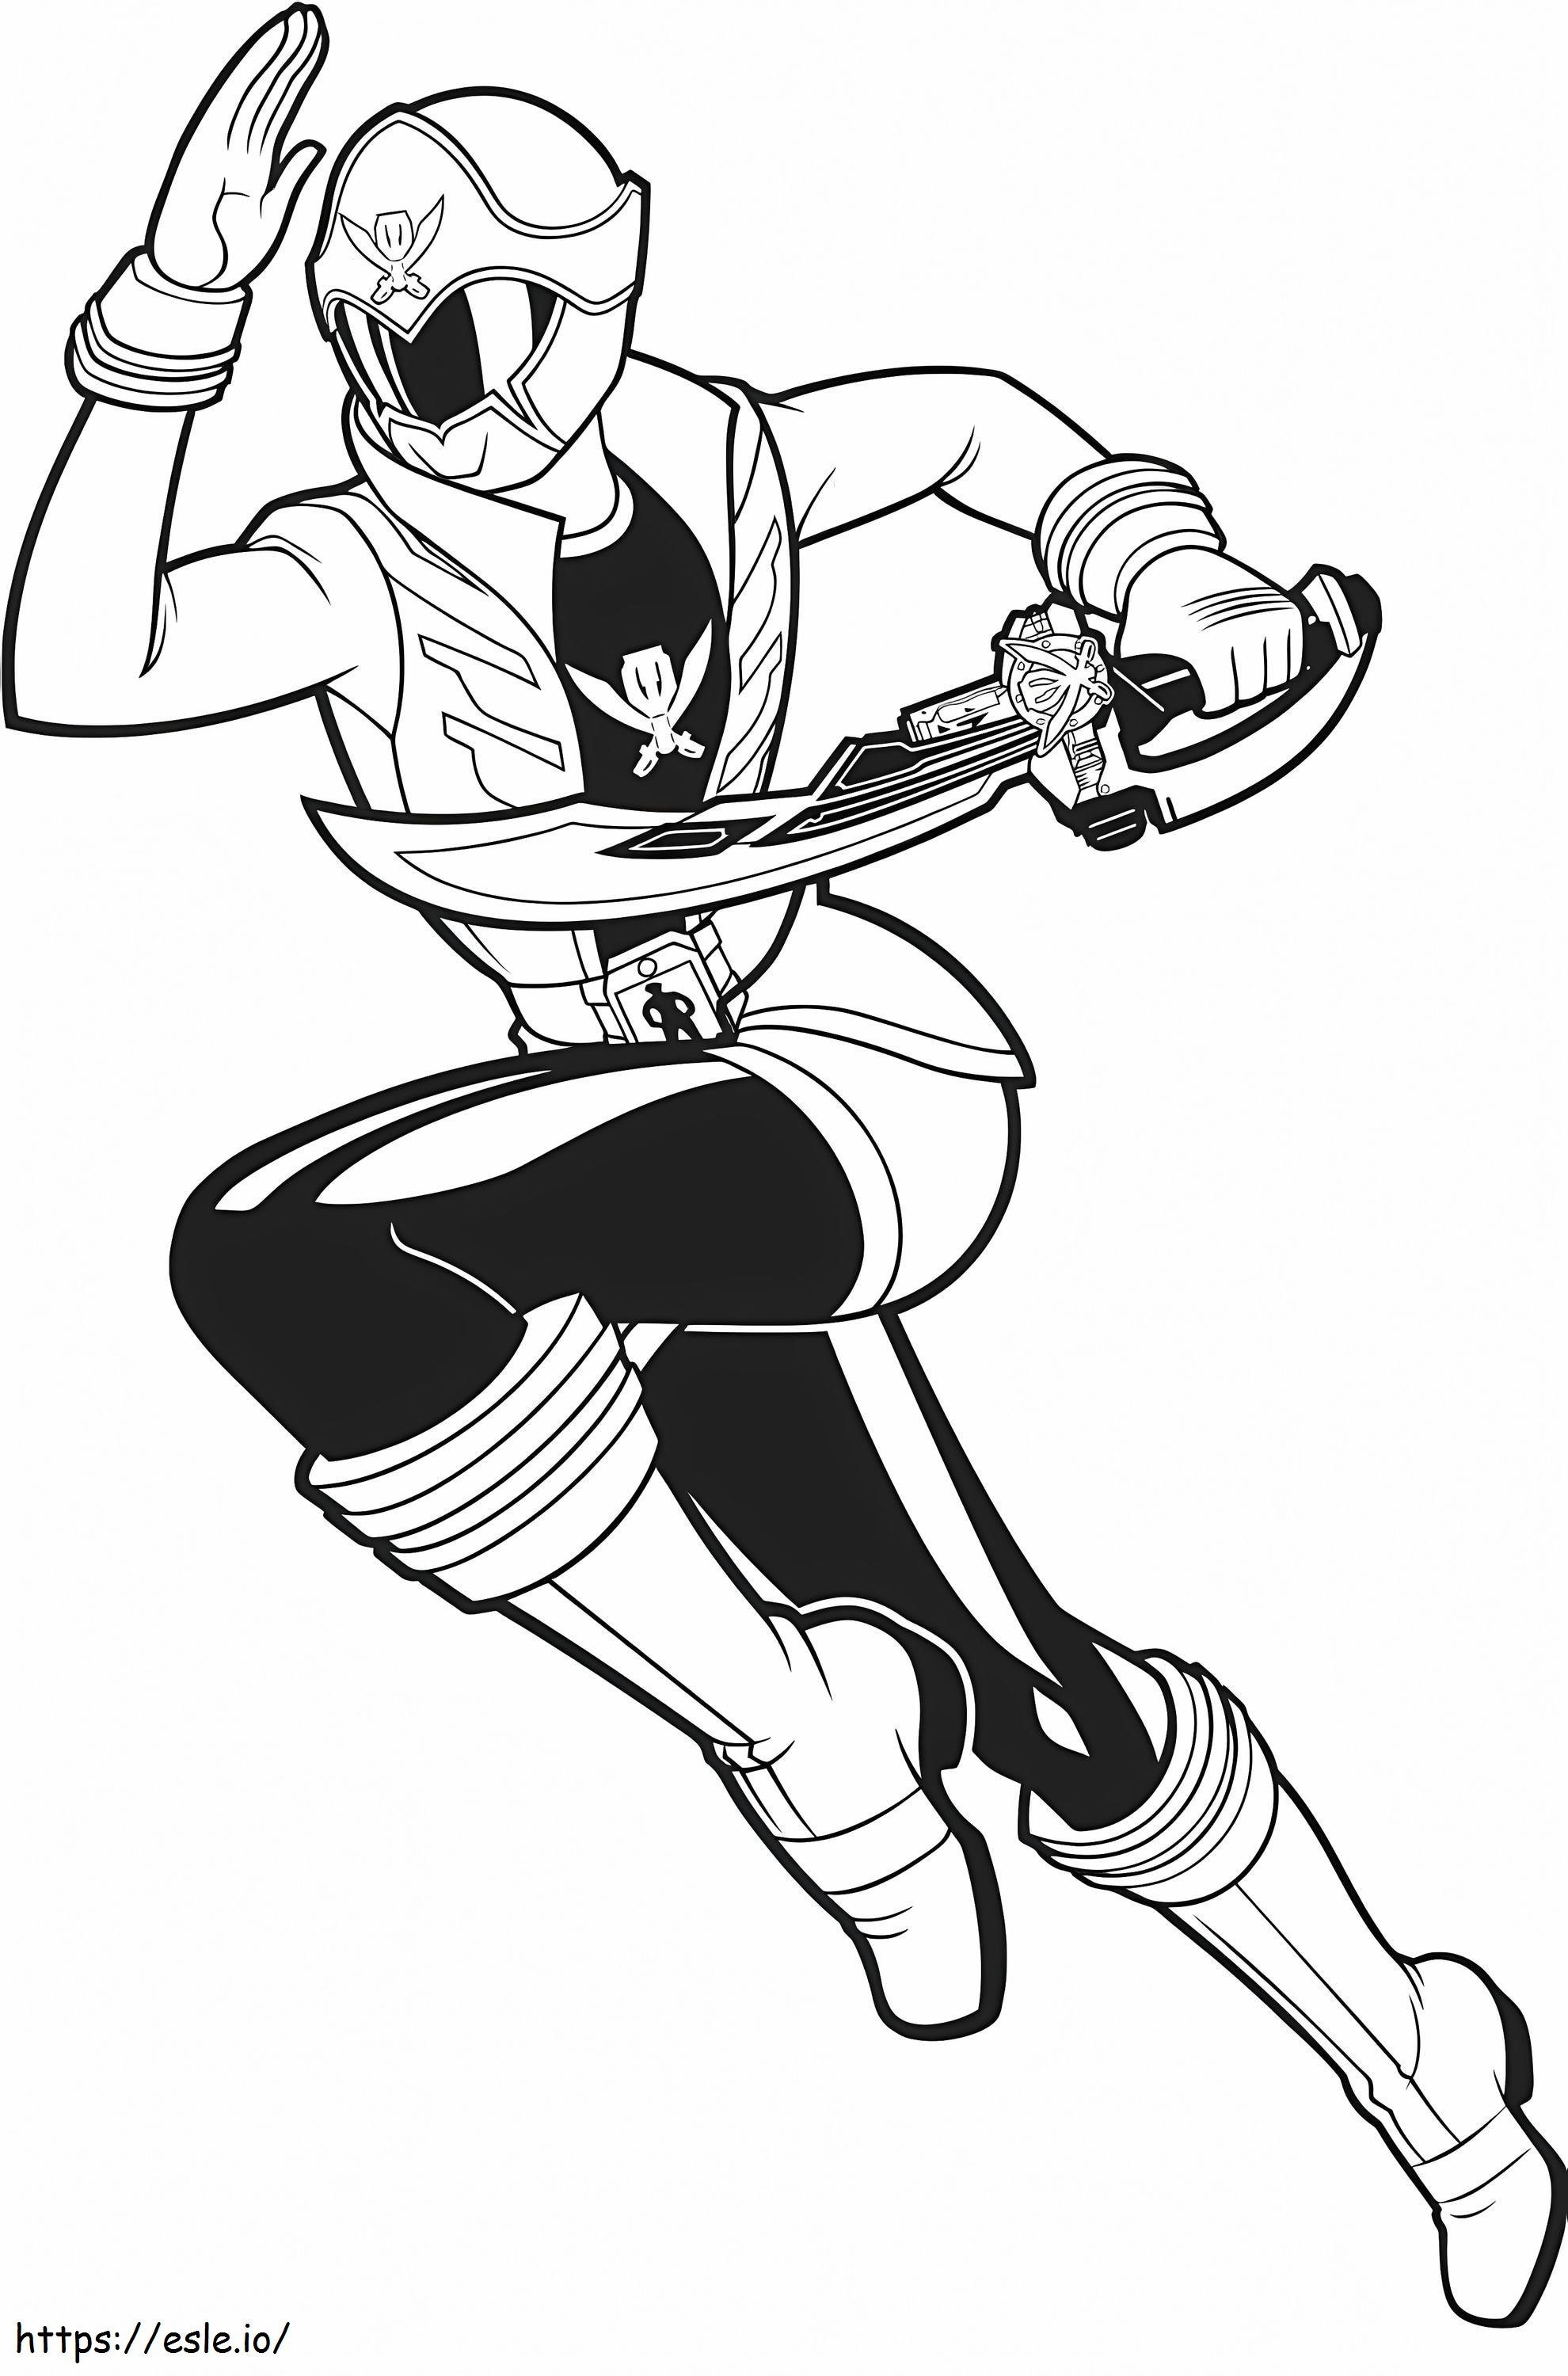 Power Rangers 18 coloring page